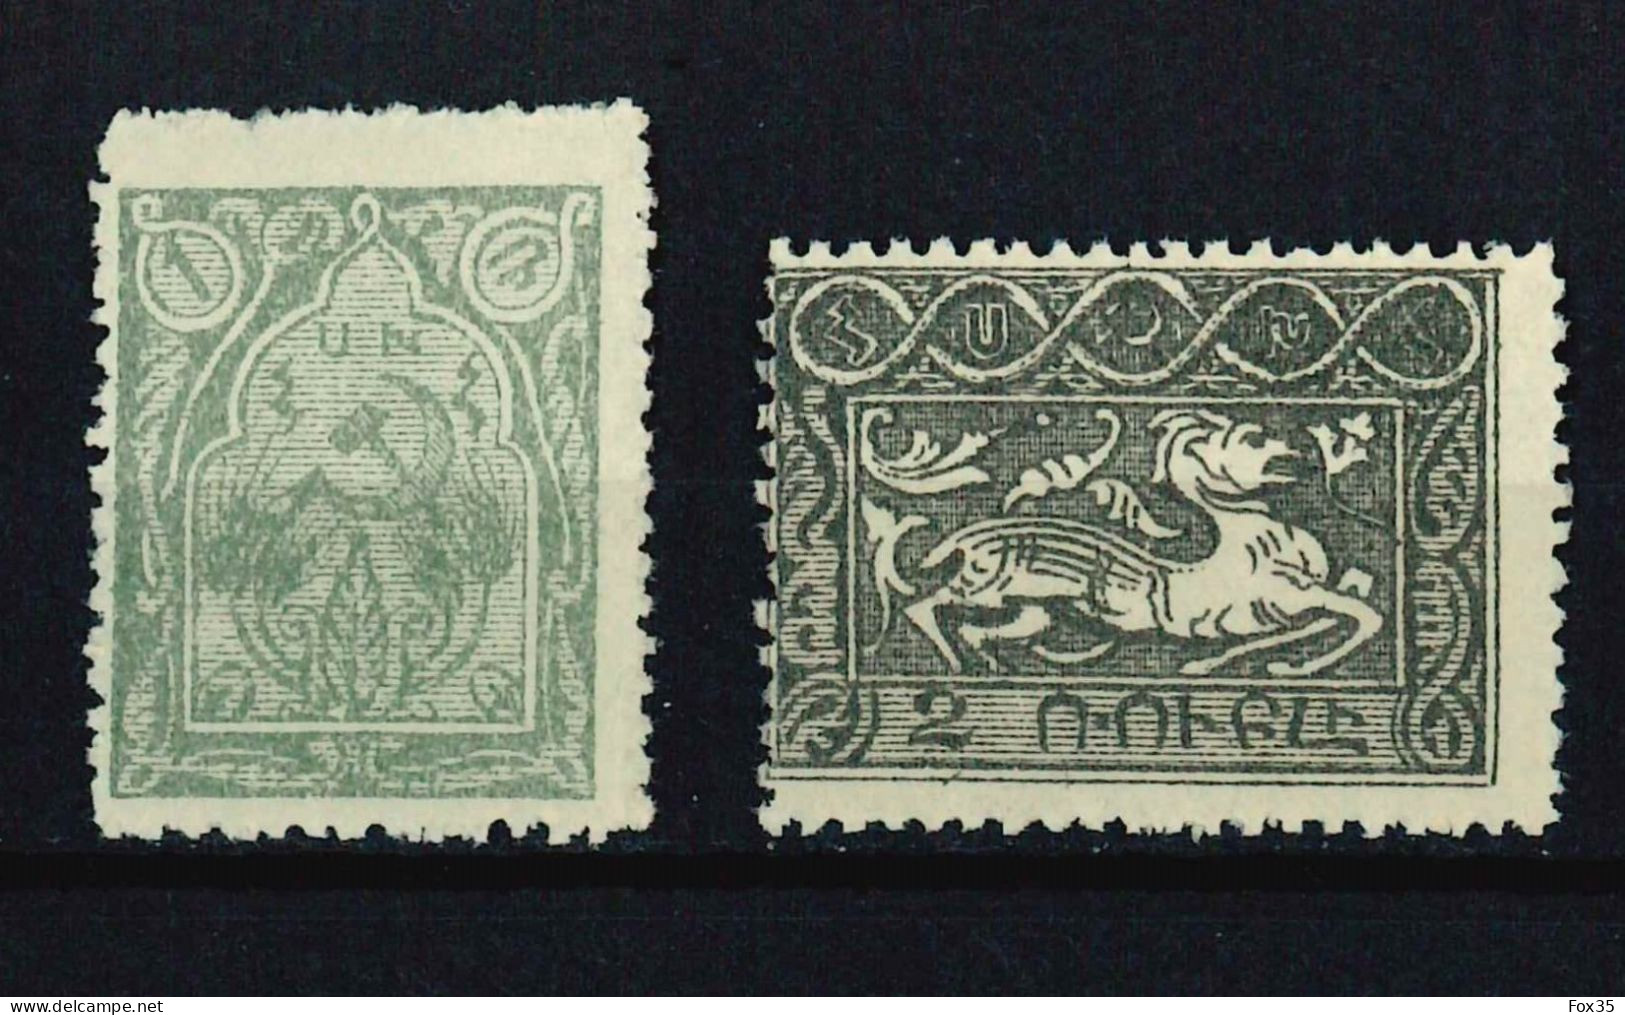 Armenia 1919-1923, 1921 First Constantinople Pictorials Issue, 'complete' Set, Perforated, Sold As Genuine, CV 48€ - Armenia